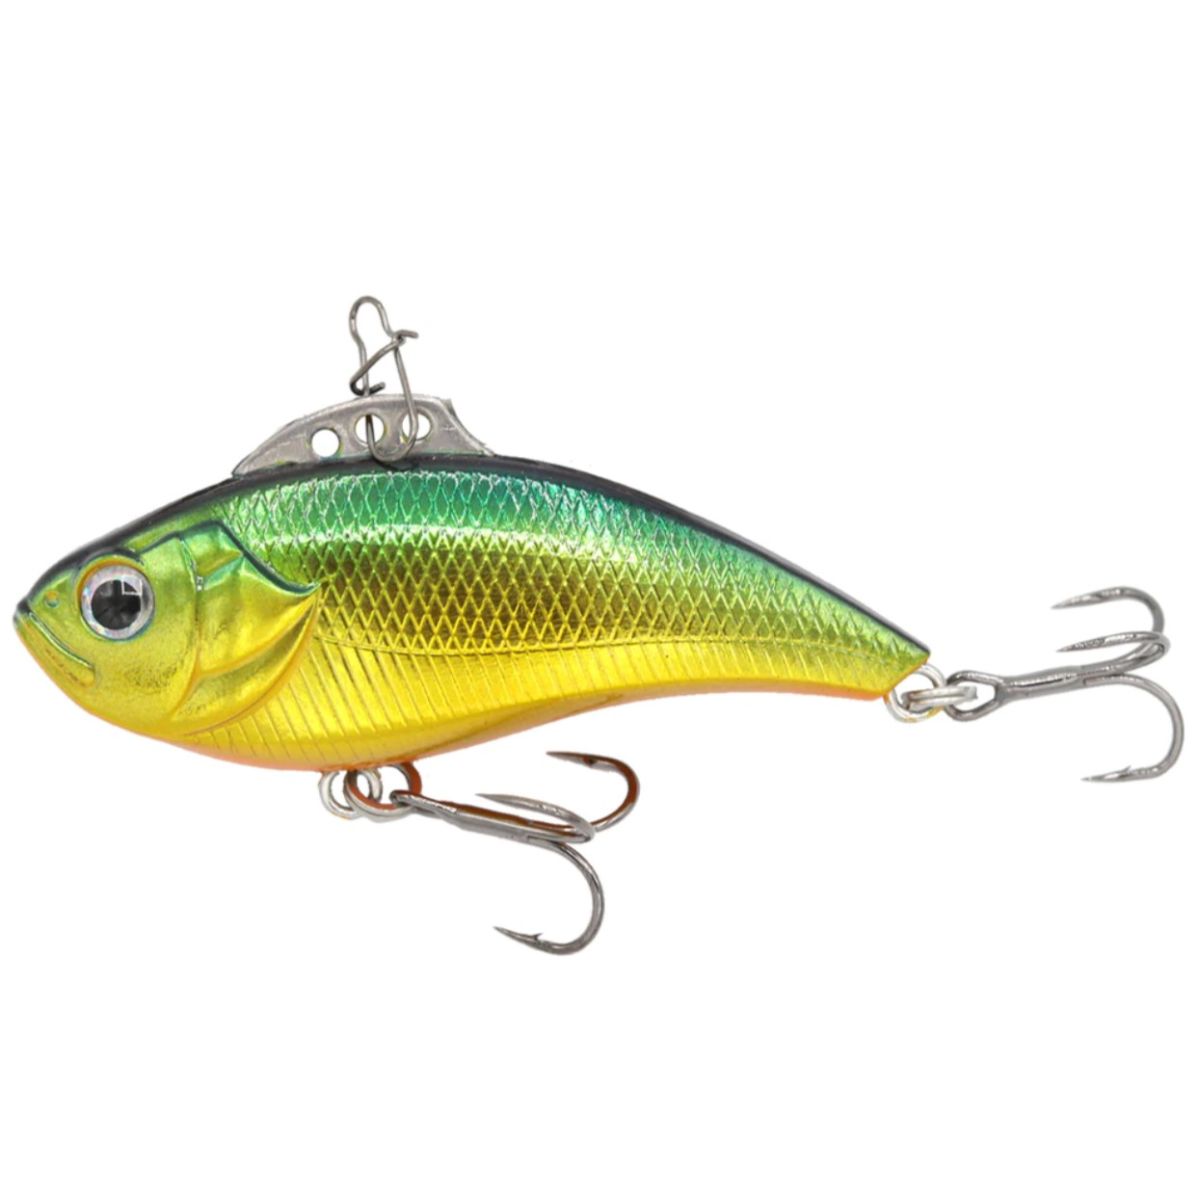 PANFISH ASSASSIN 2 CRAPPIE DAPPER TORPEDO SOFT BAIT - Northwoods Wholesale  Outlet